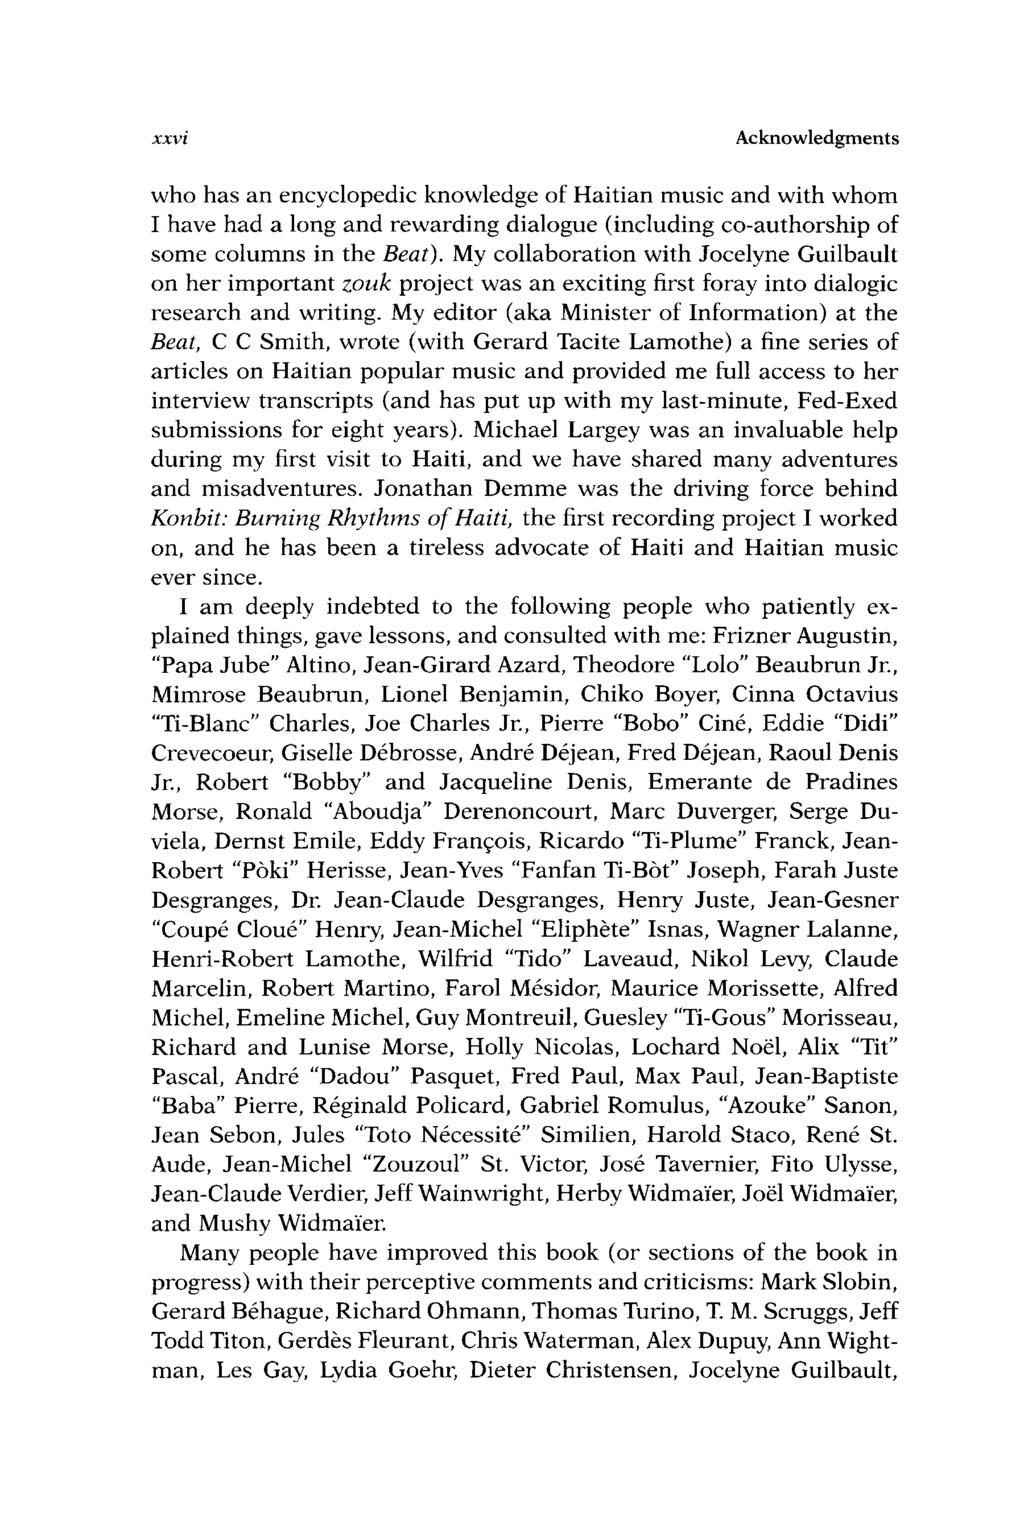 xxvi Acknowledgments who has an encyclopedic knowledge of Haitian music and with whom I have had a long and rewarding dialogue (including co-authorship of some columns in the Beat).